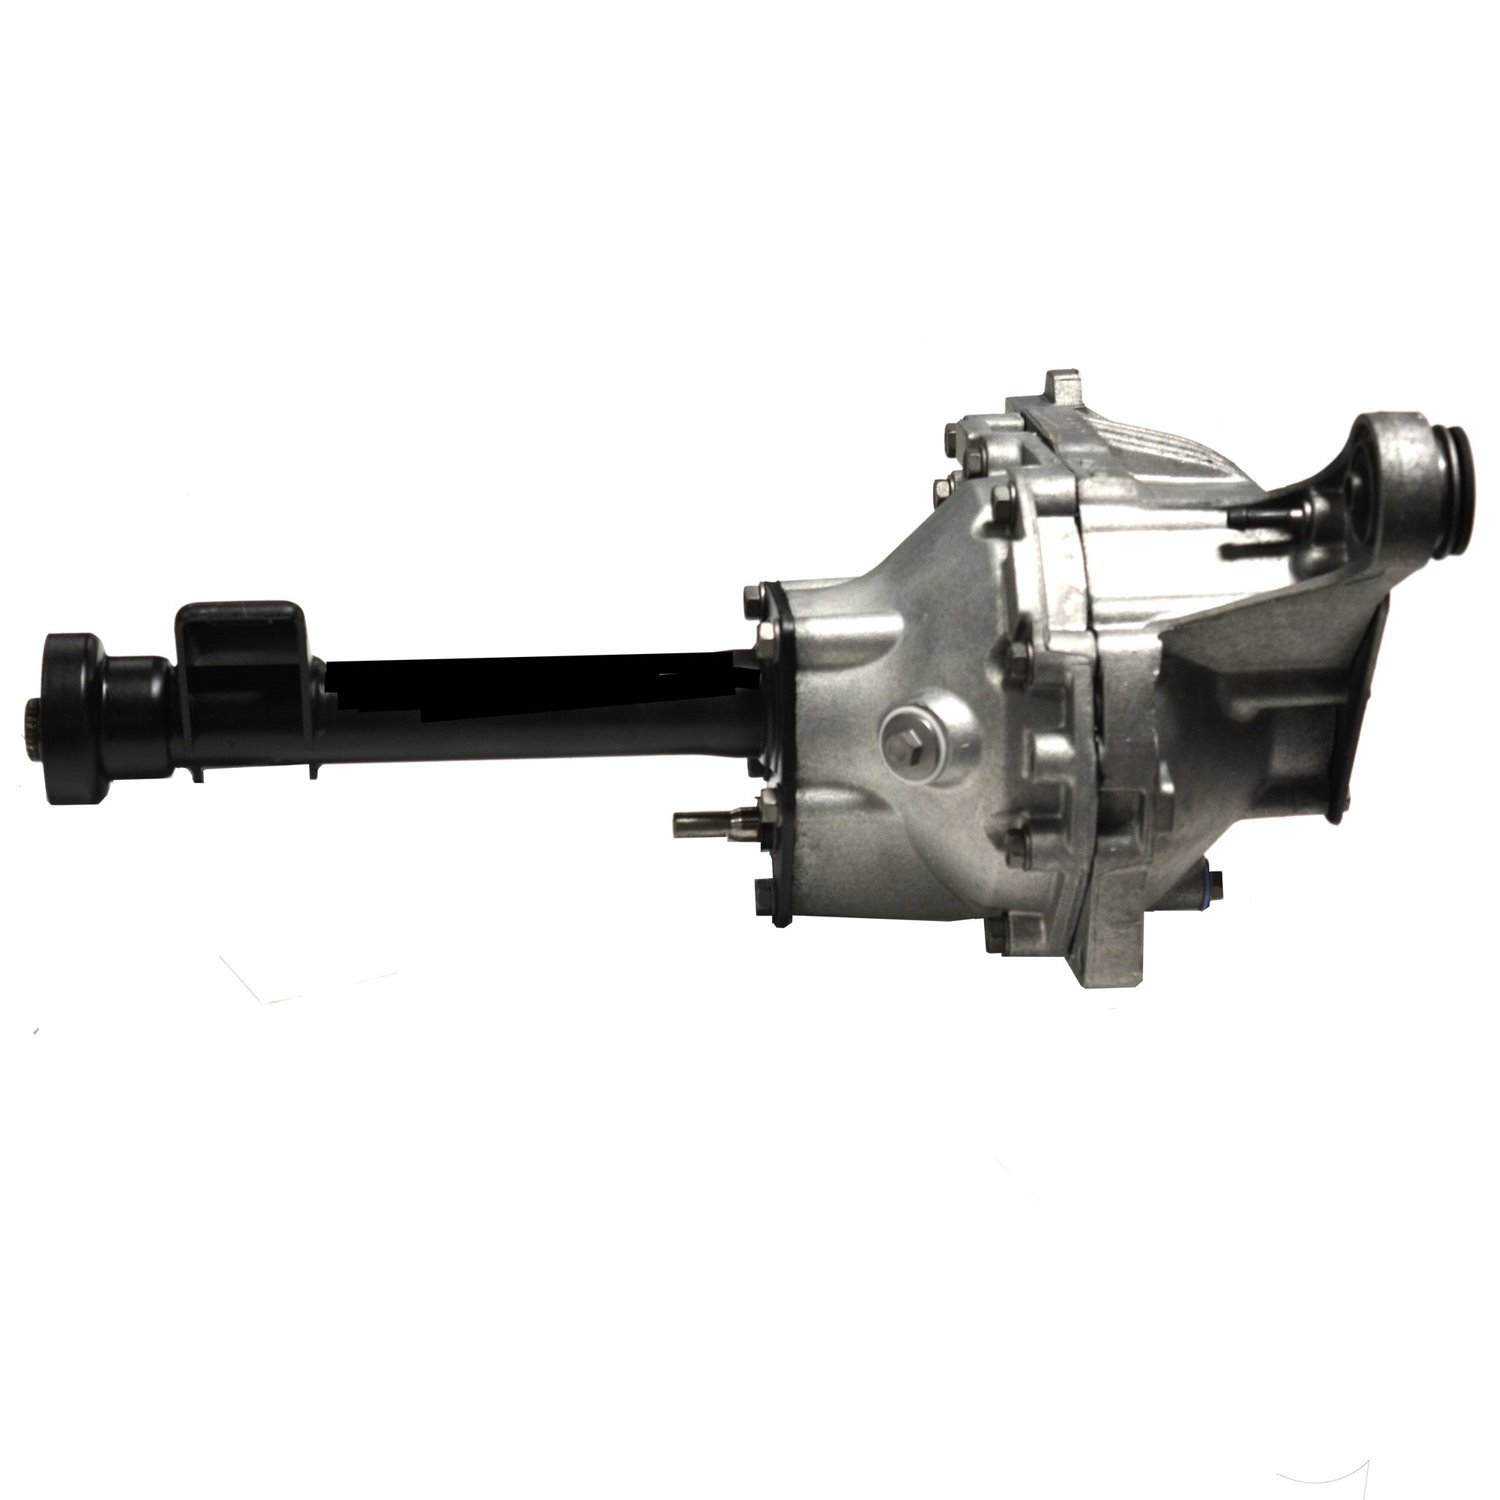 Remanufactured Axle Assembly for GM 7.2 IFS 97-05 Chevy S10 & S15 3.73 Ratio